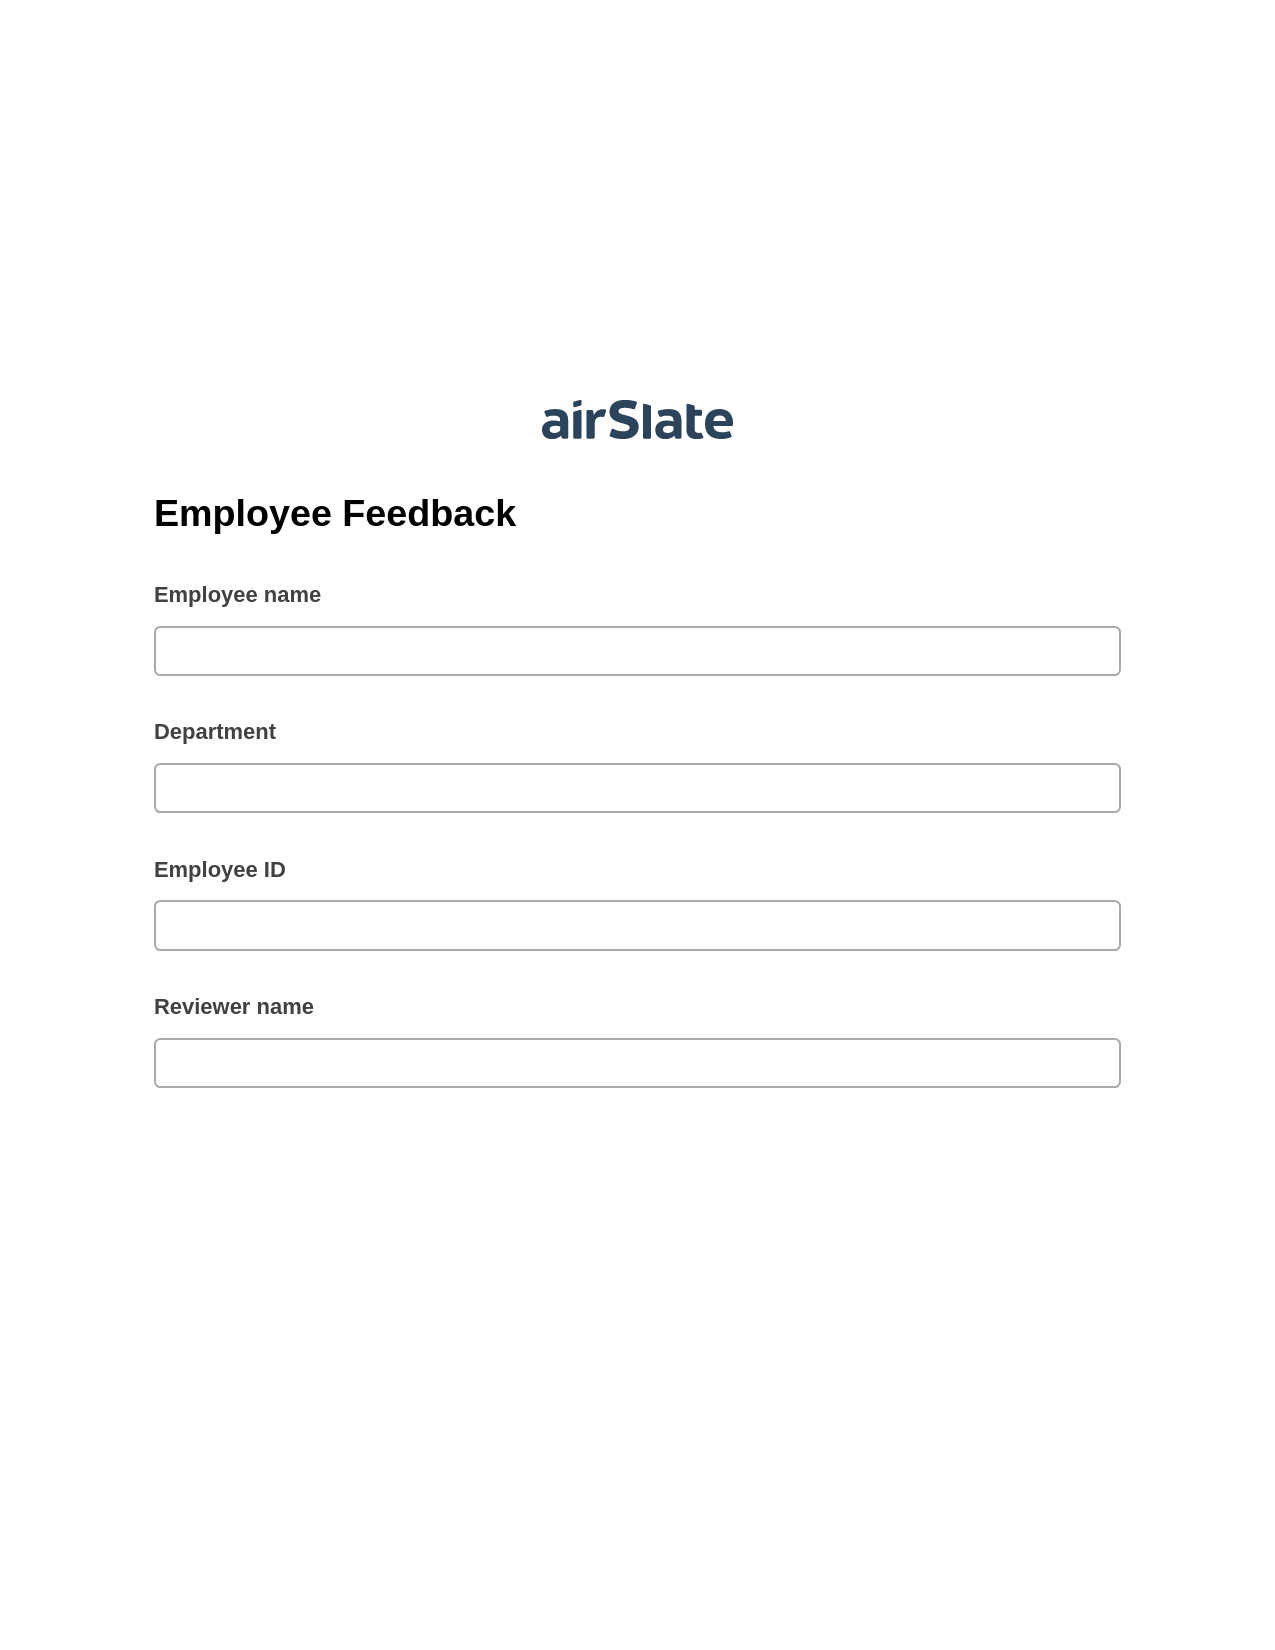 Multirole Employee Feedback Pre-fill Slate from MS Dynamics 365 Records Bot, Email Notification Bot, Box Bot